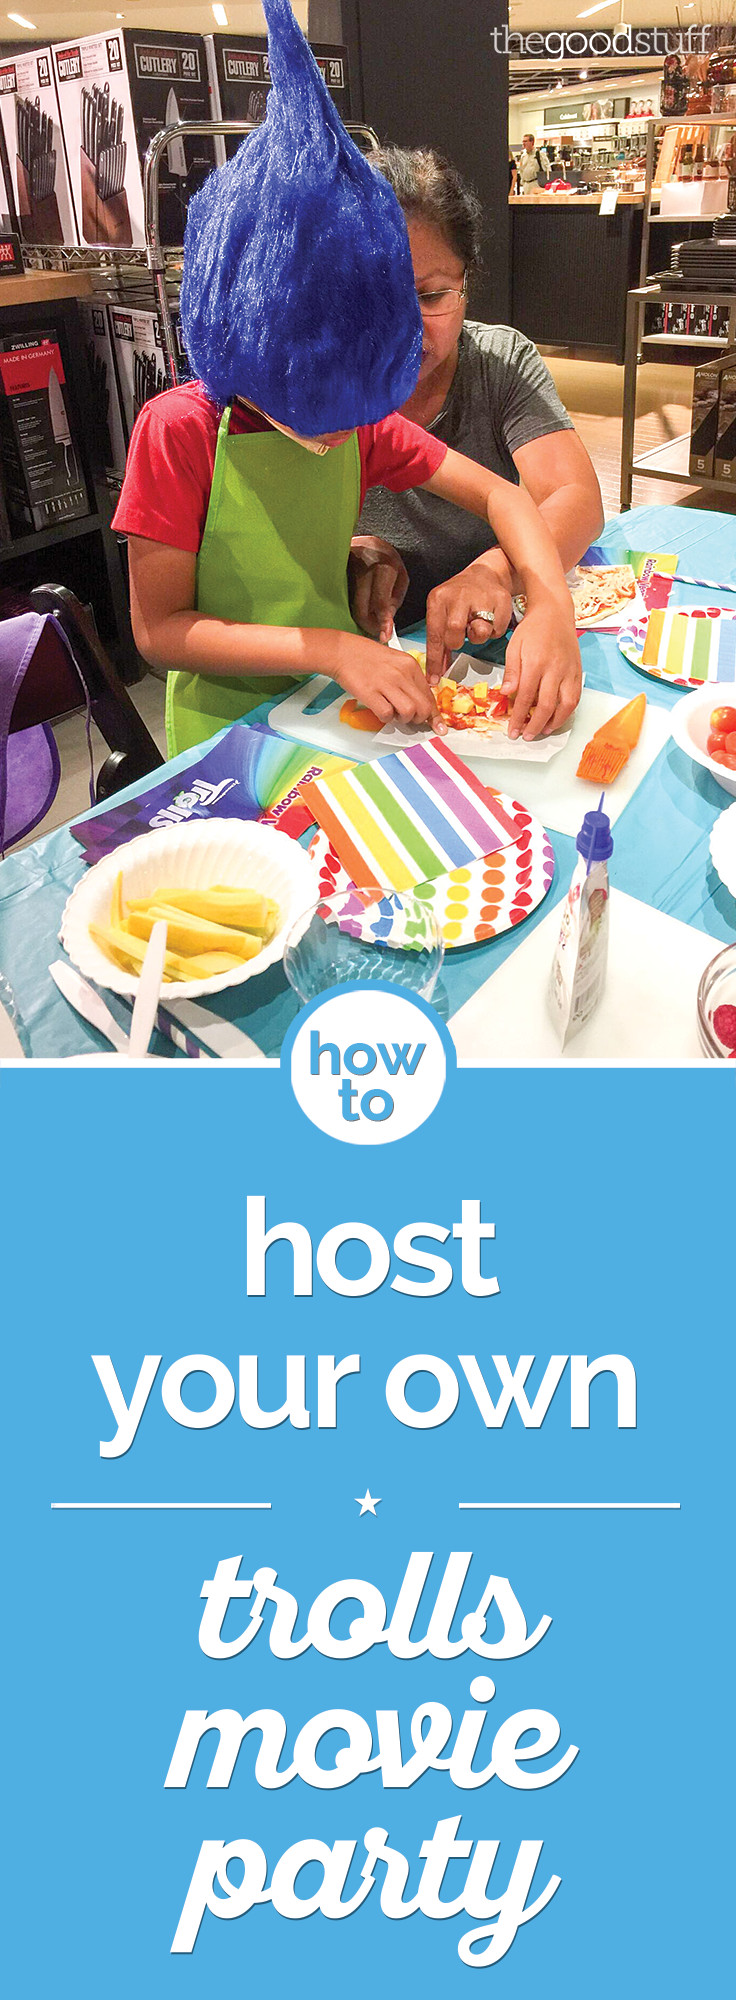 Trolls Movie Party Ideas
 How to Host Your Own Trolls Movie Party thegoodstuff